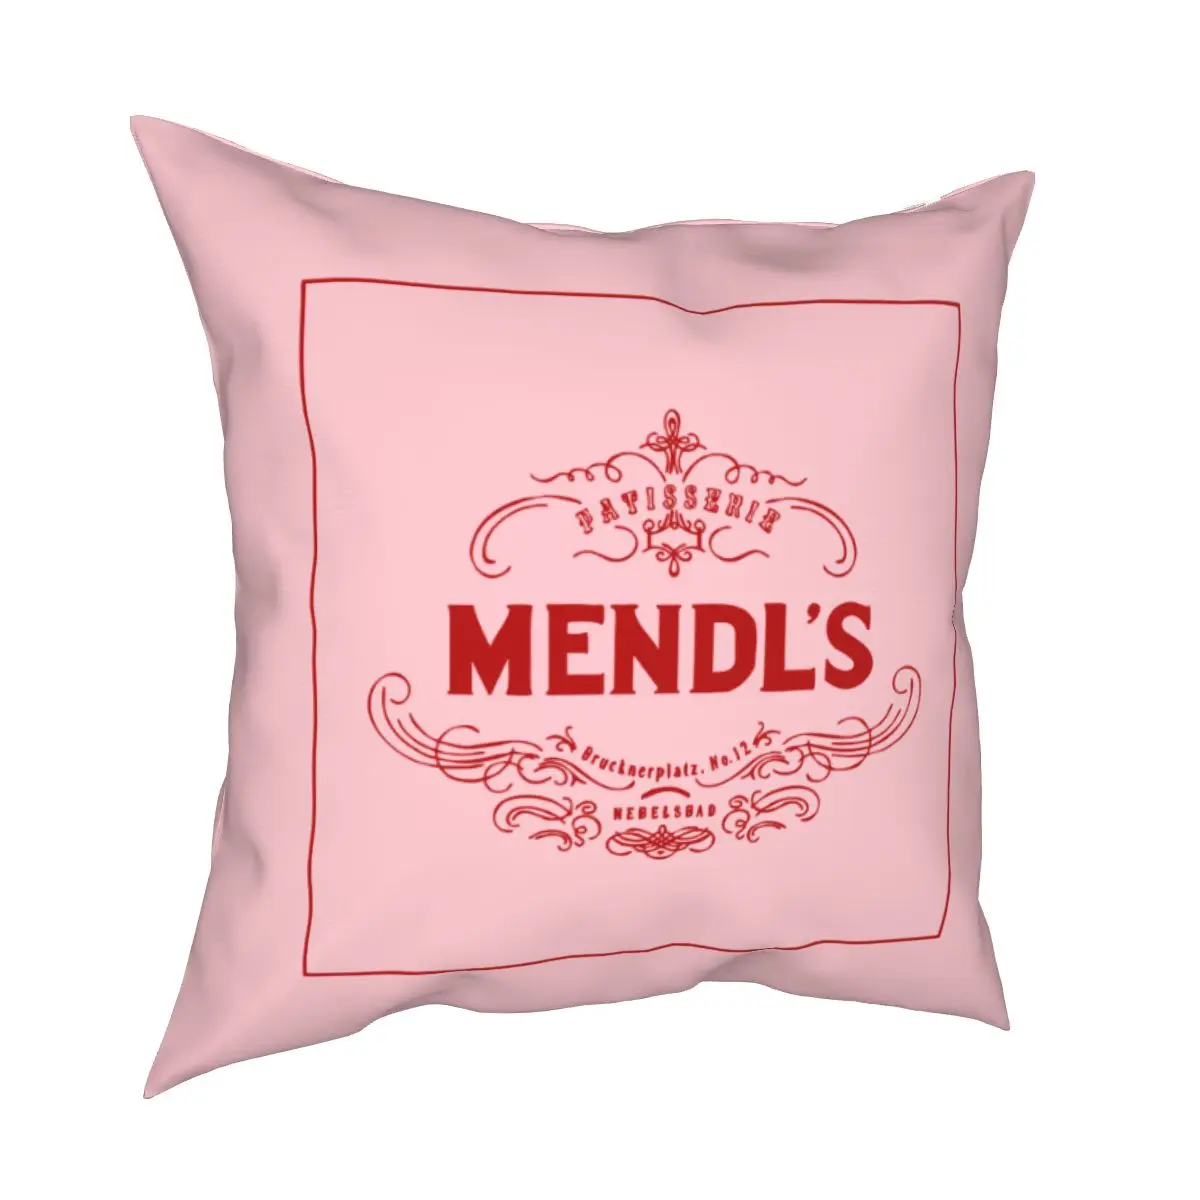 

Mendl's Patisserie Pillow Case The Grand Budapest Hotel Wes Anderson Movie Cushion Cover Decor Pillowcase for Room 45*45cm